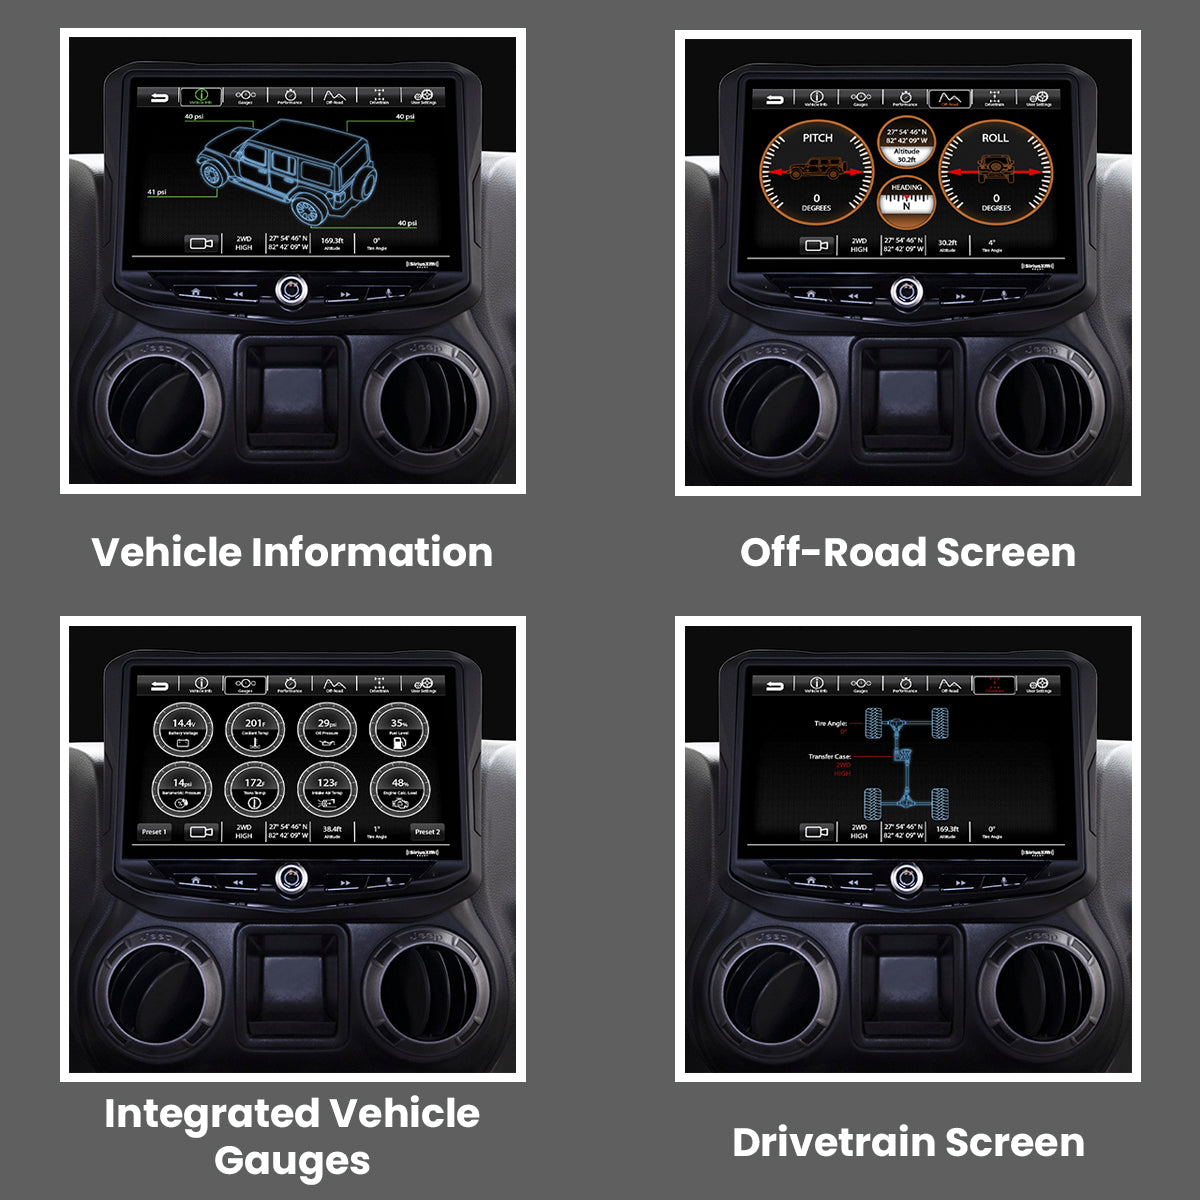 Jeep Wrangler JK (2011-2018) HEIGH10 10" Radio Fully Integrated Kit | Displays Vehicle Information and Off-Road Mode